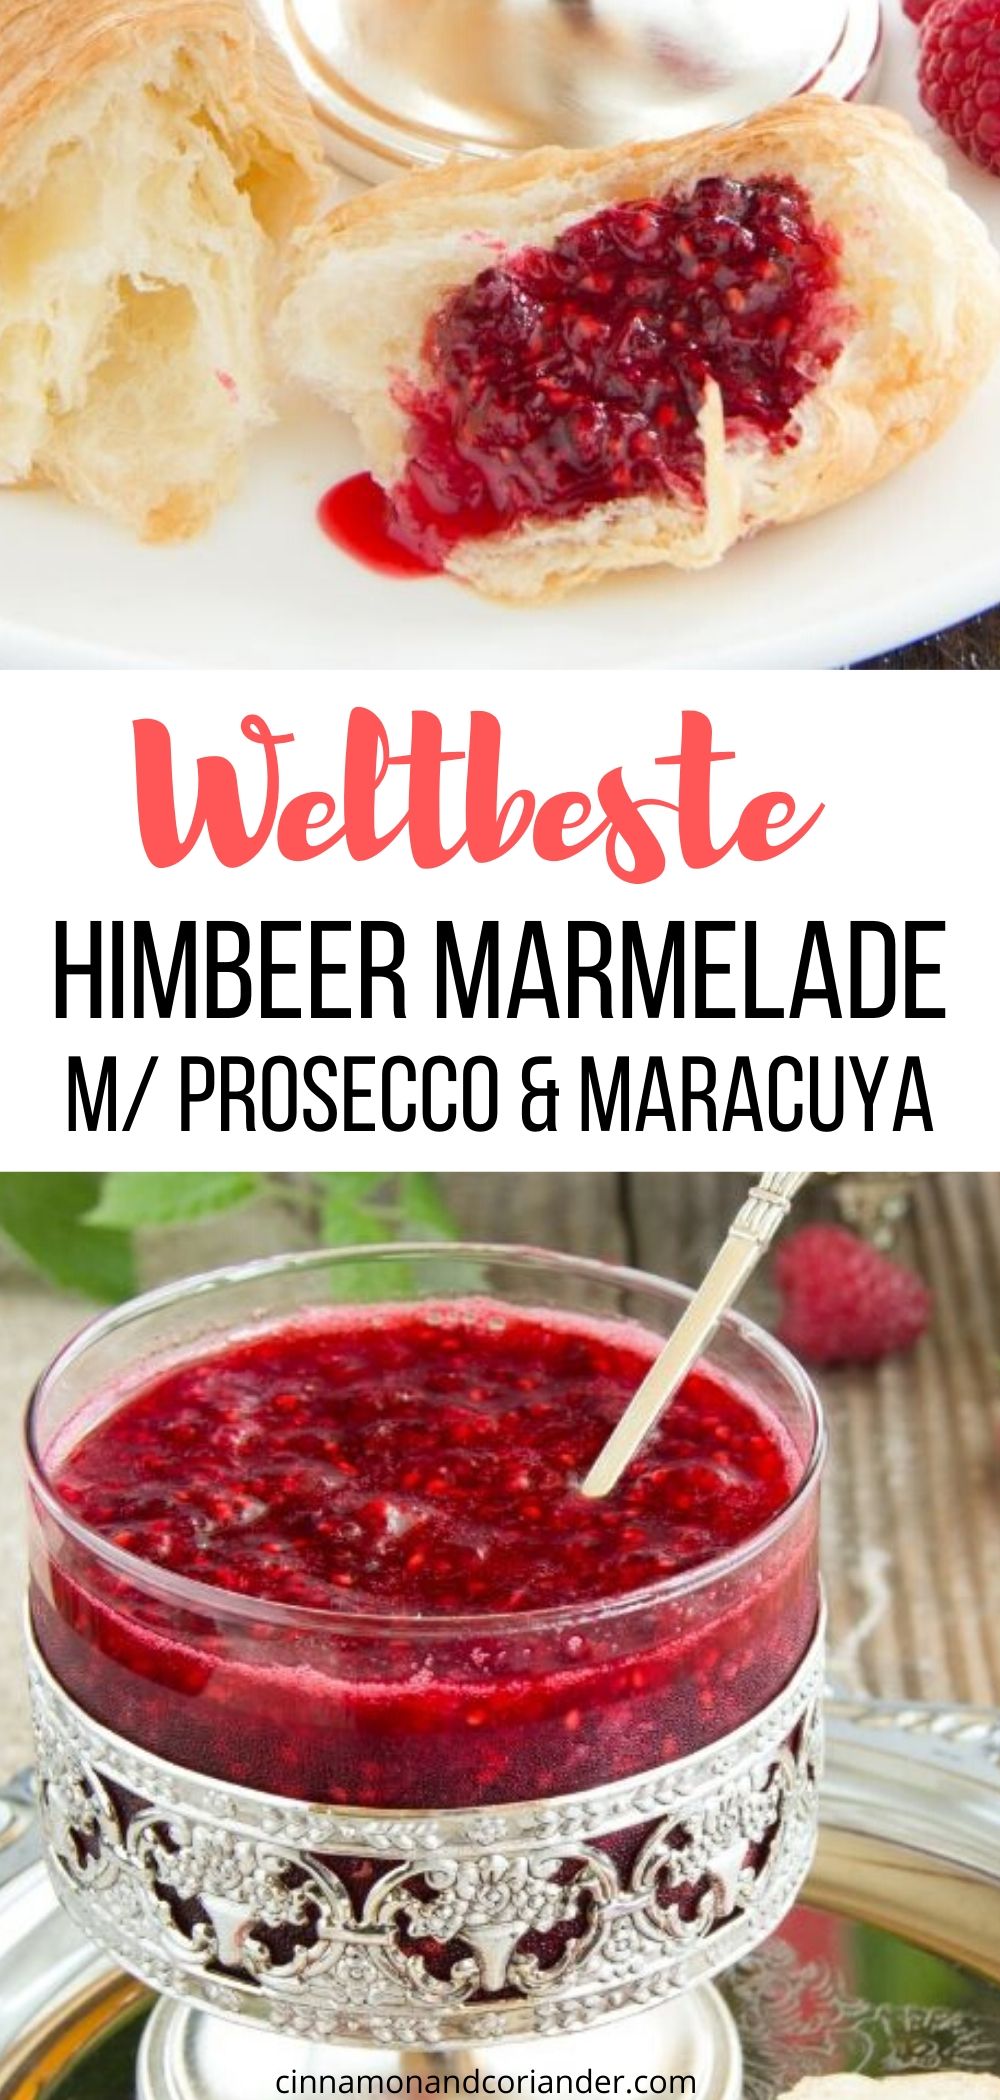 Easy Raspberry Jam with Prosecco and Passion Fruit